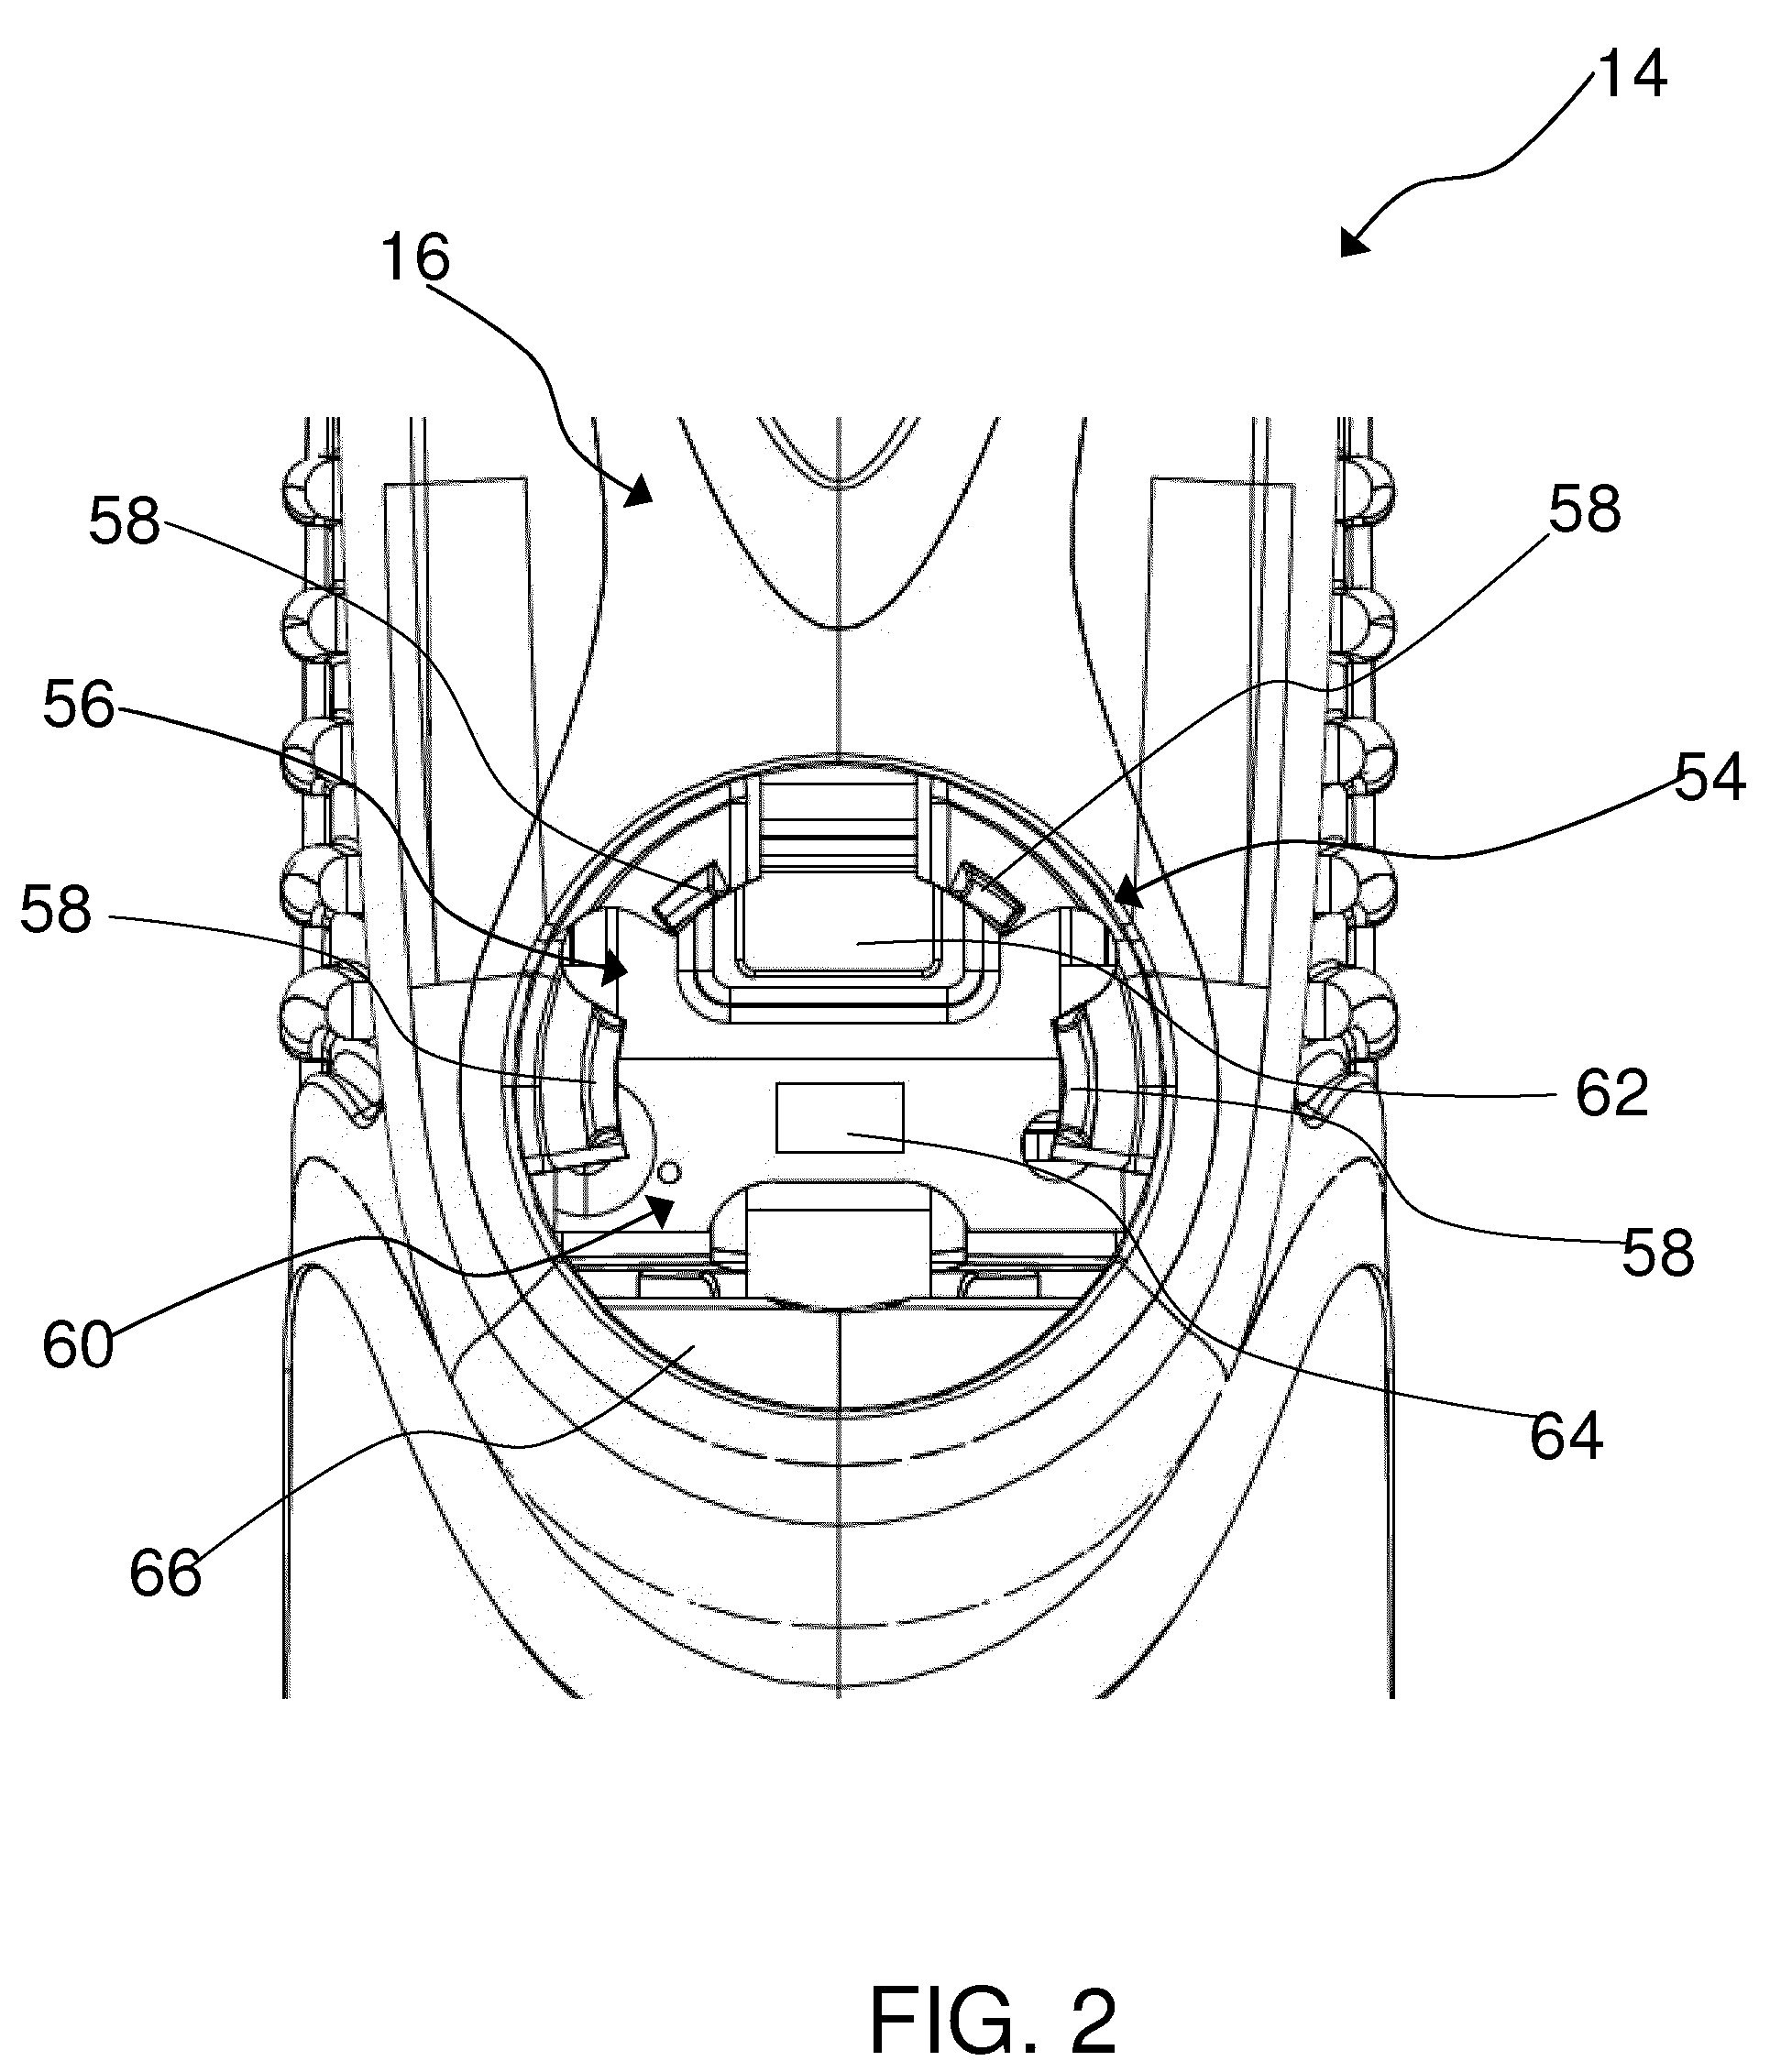 Device with an illuminated button assembly